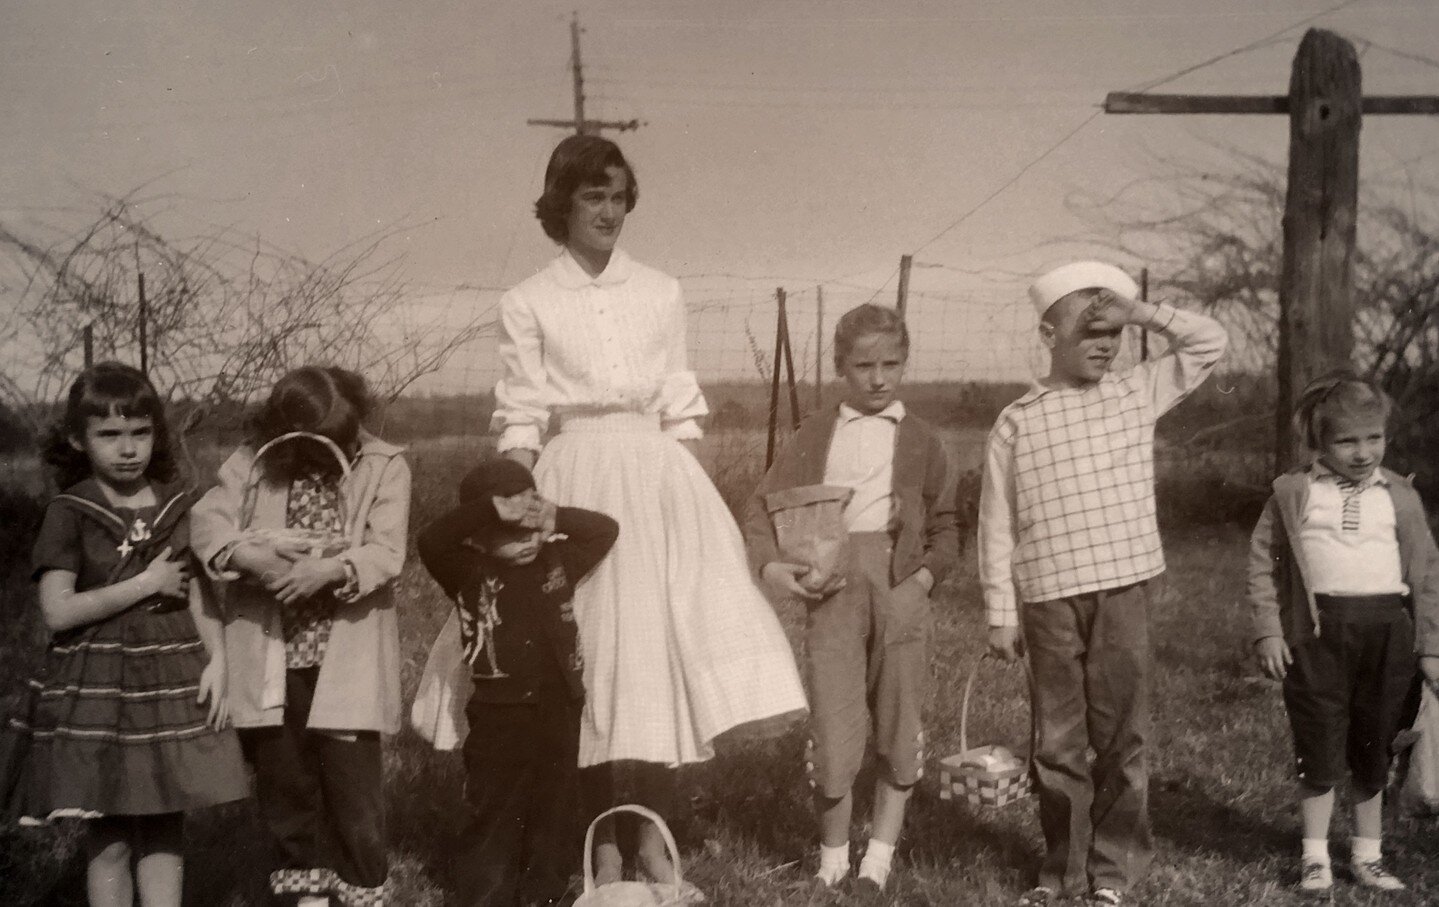 Are you ready for Easter?! It will be here before you know it.⁠
⁠
This group in a found photo from the 50s has their pre Easter egg hunt game faces on!⁠
⁠
#easter #easteregghunt #vintageeaster #easterthrowback #1950s #foundphoto #vintagephoto #blacka